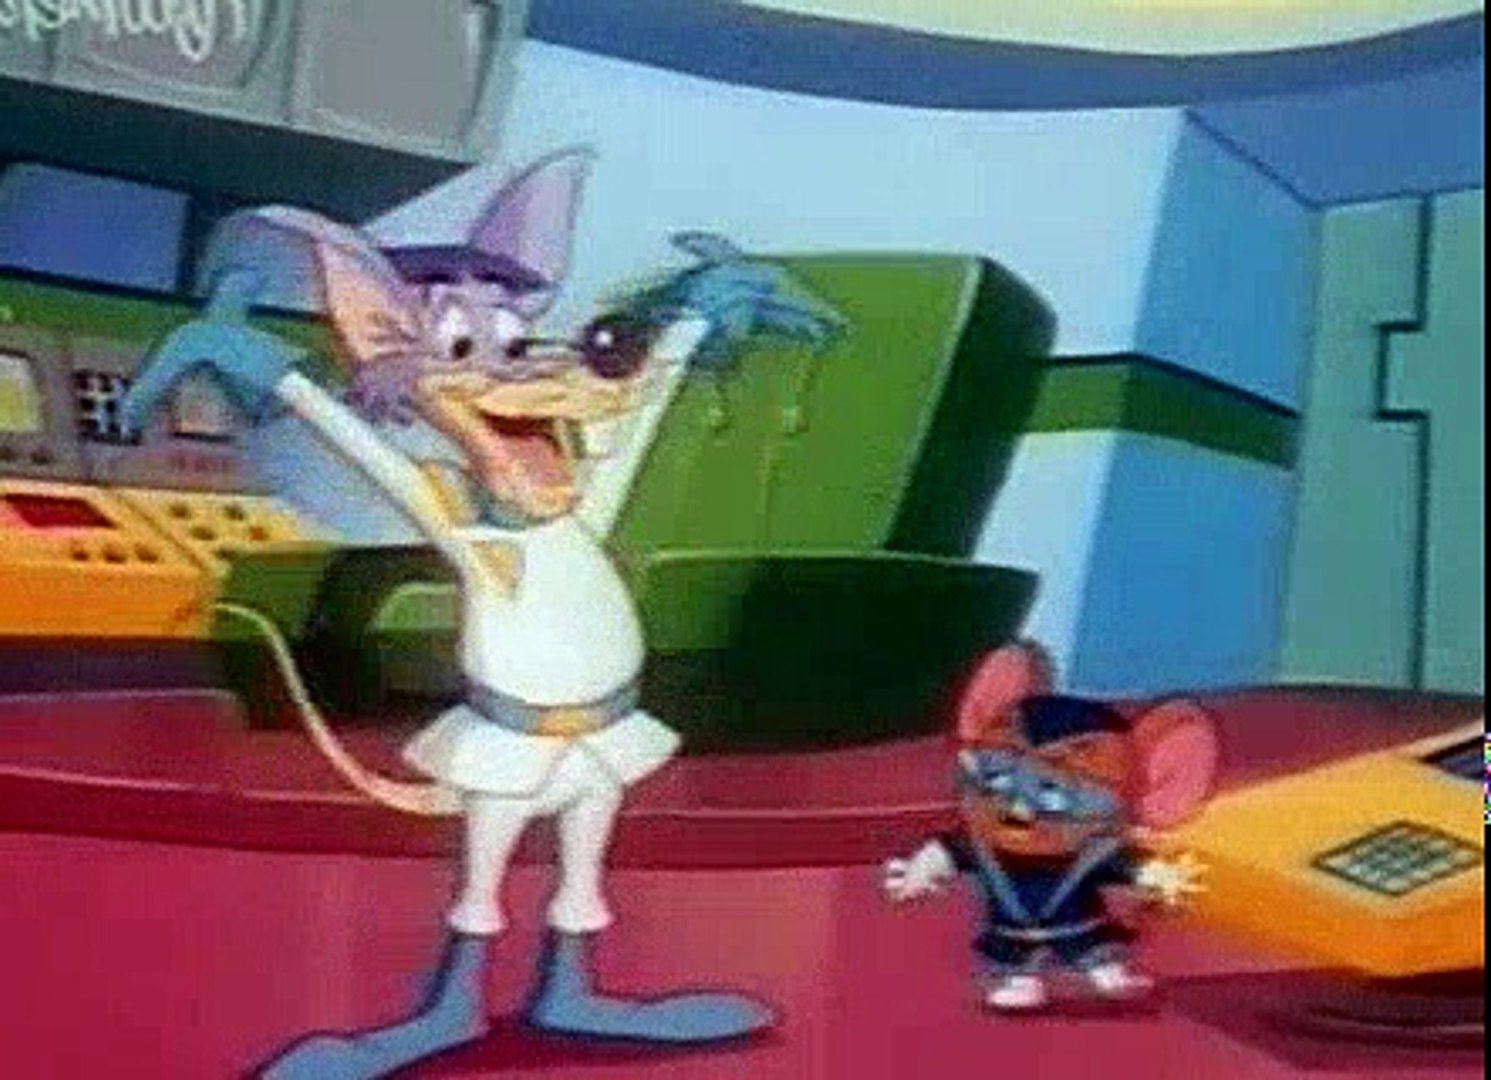 Tom and Jerry¨Run Jerry Run! Cartoon Network Games - video Dailymotion